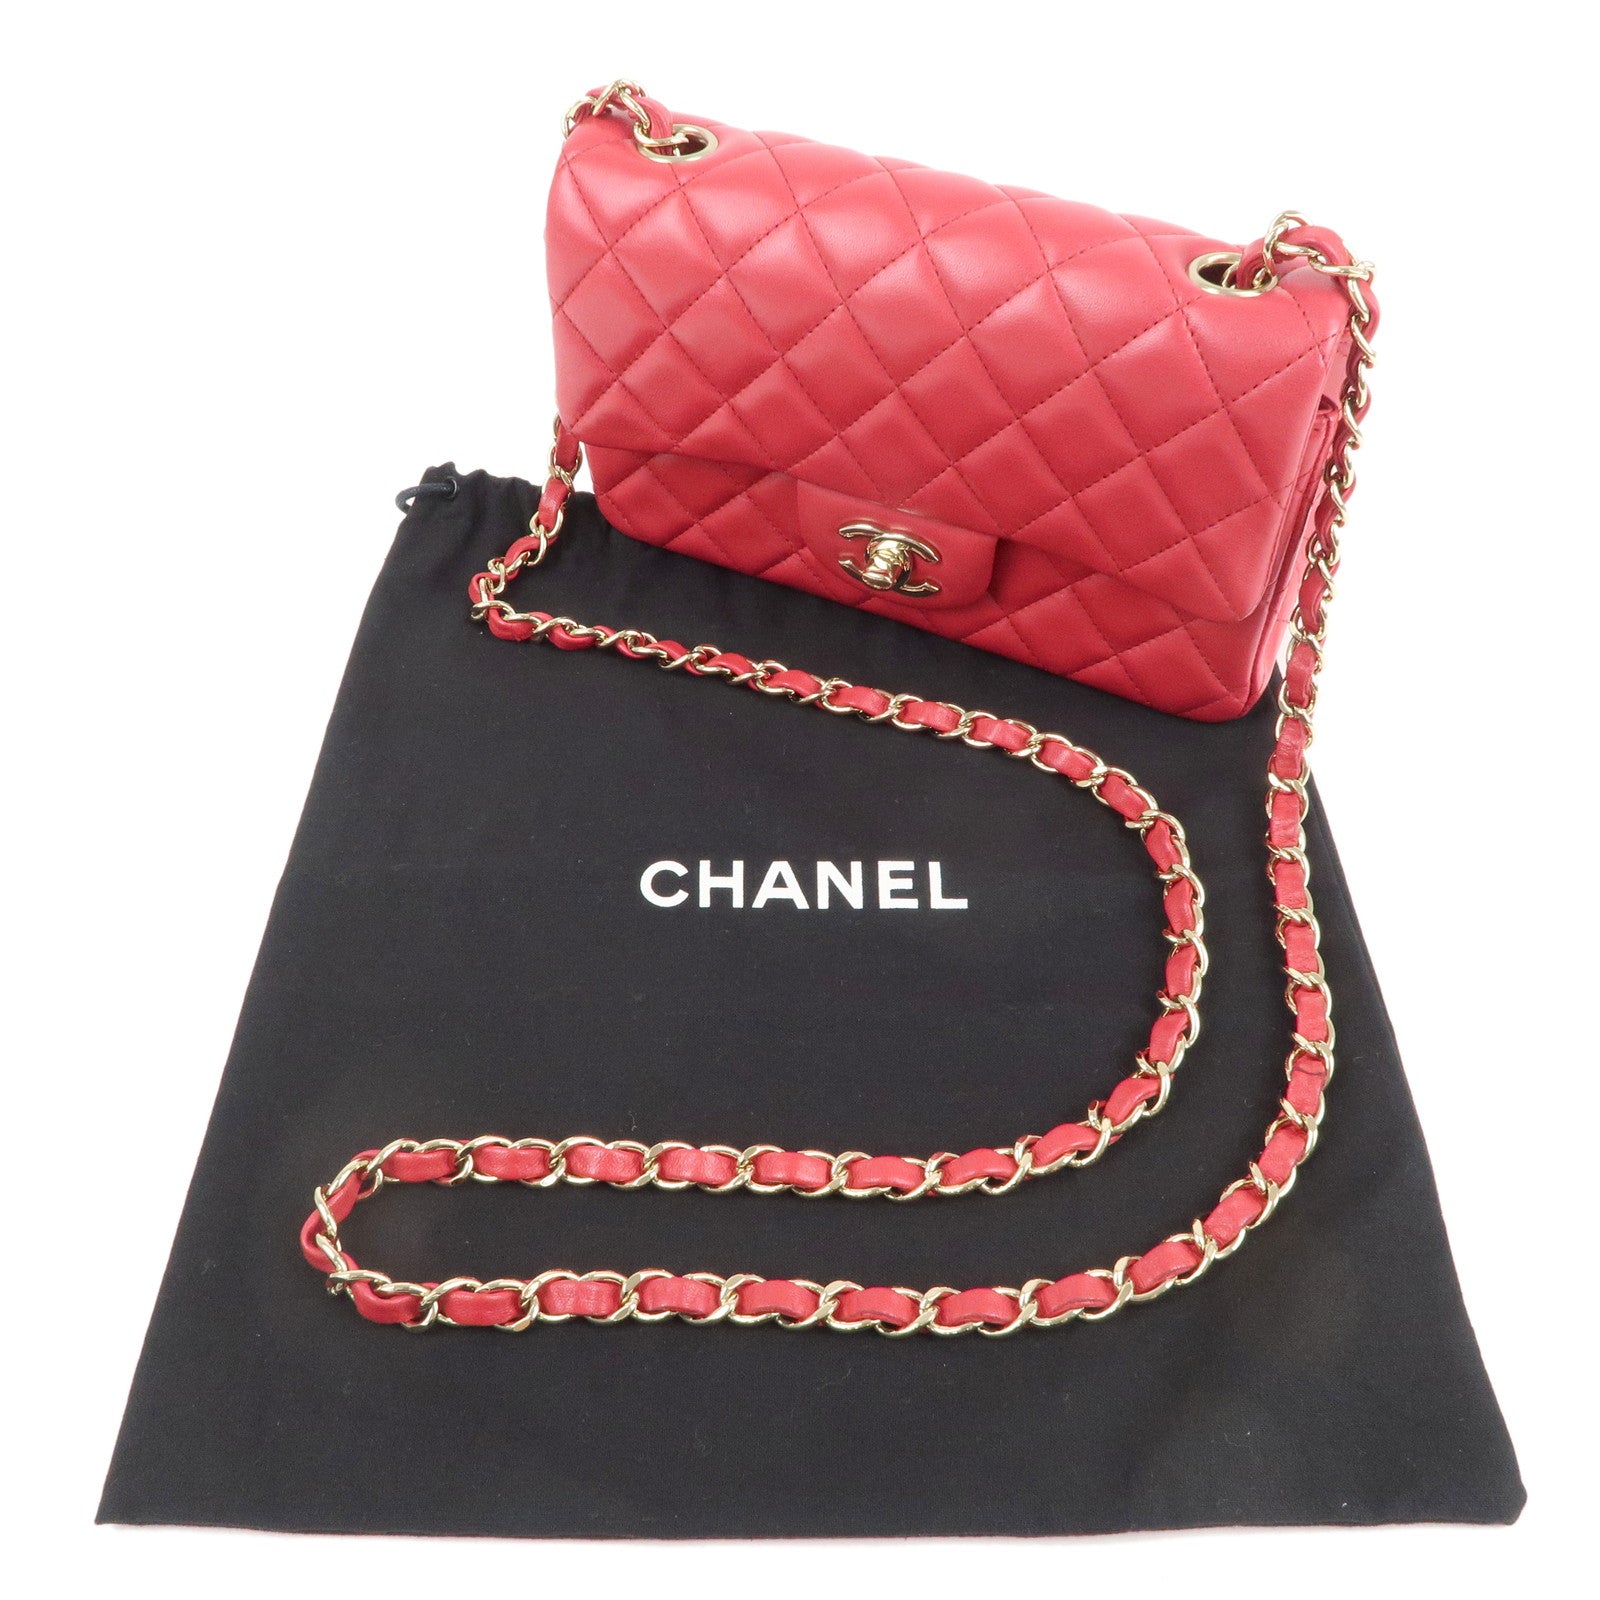 KOMEHYO, 【Unused items】CHANEL Timeless Classic Line AP0231 WALLET, CHANEL, Brand  wallets and accessories